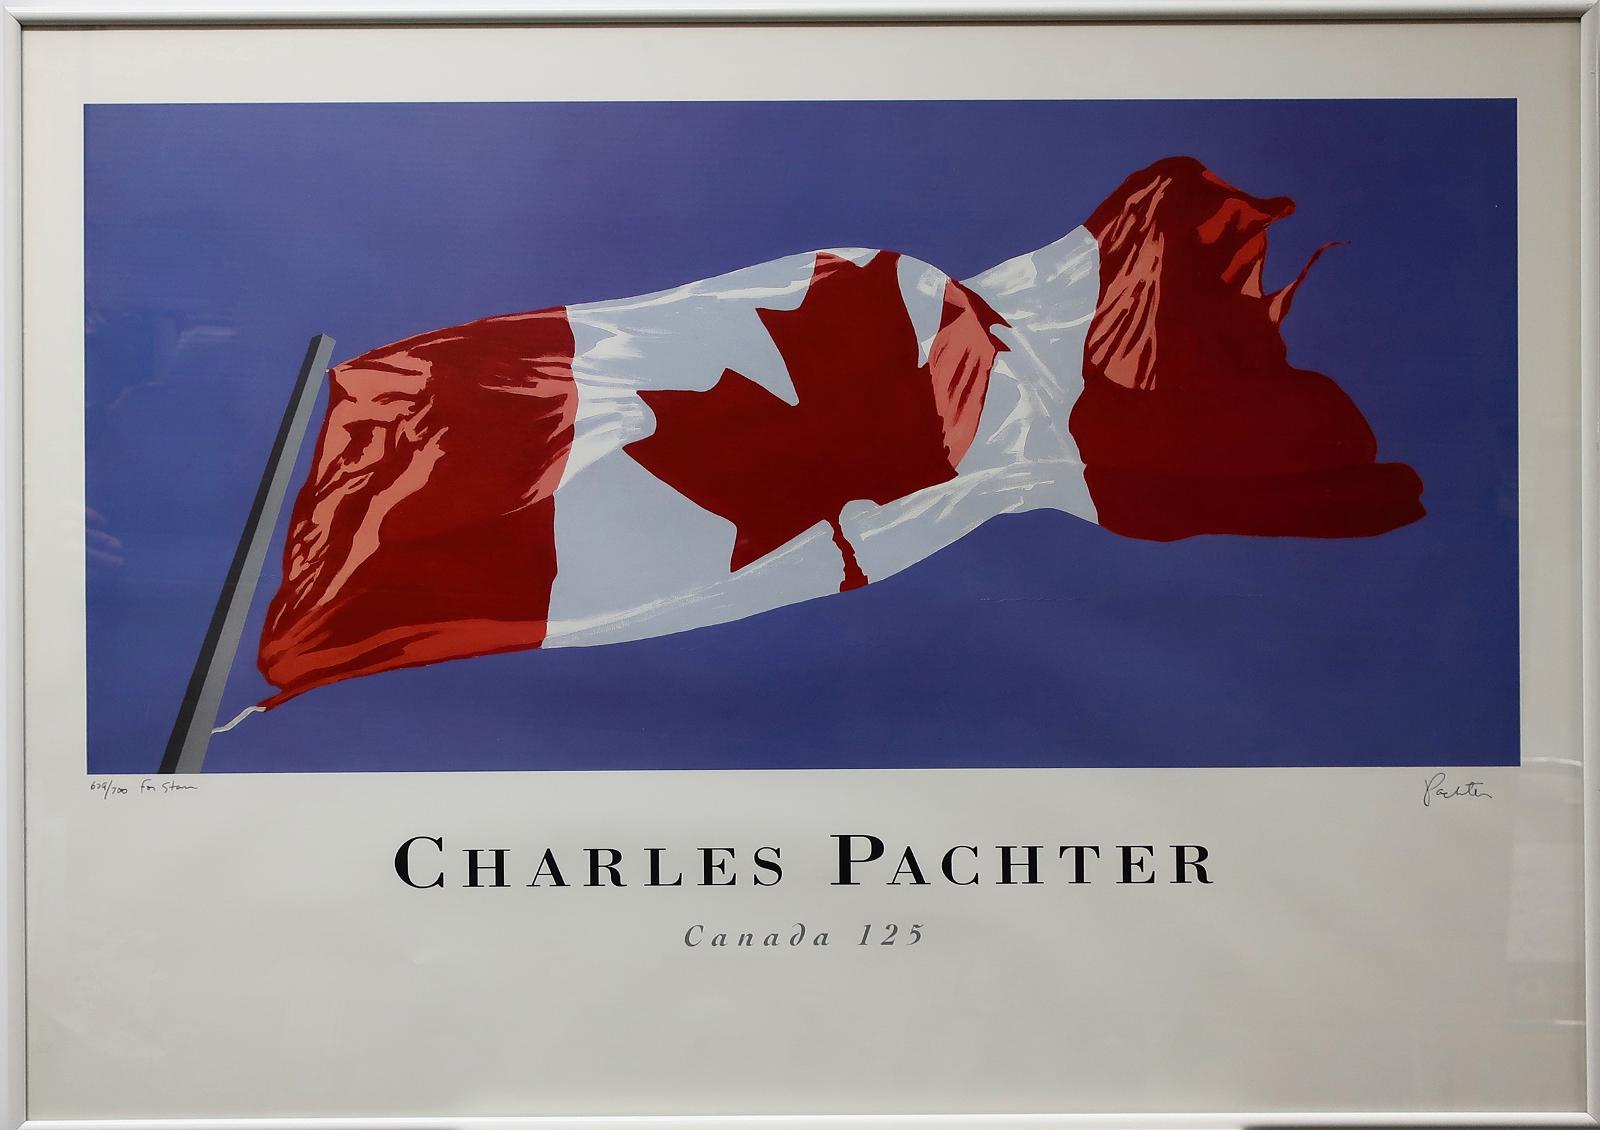 Charles Pachter (1942) - Canada 125